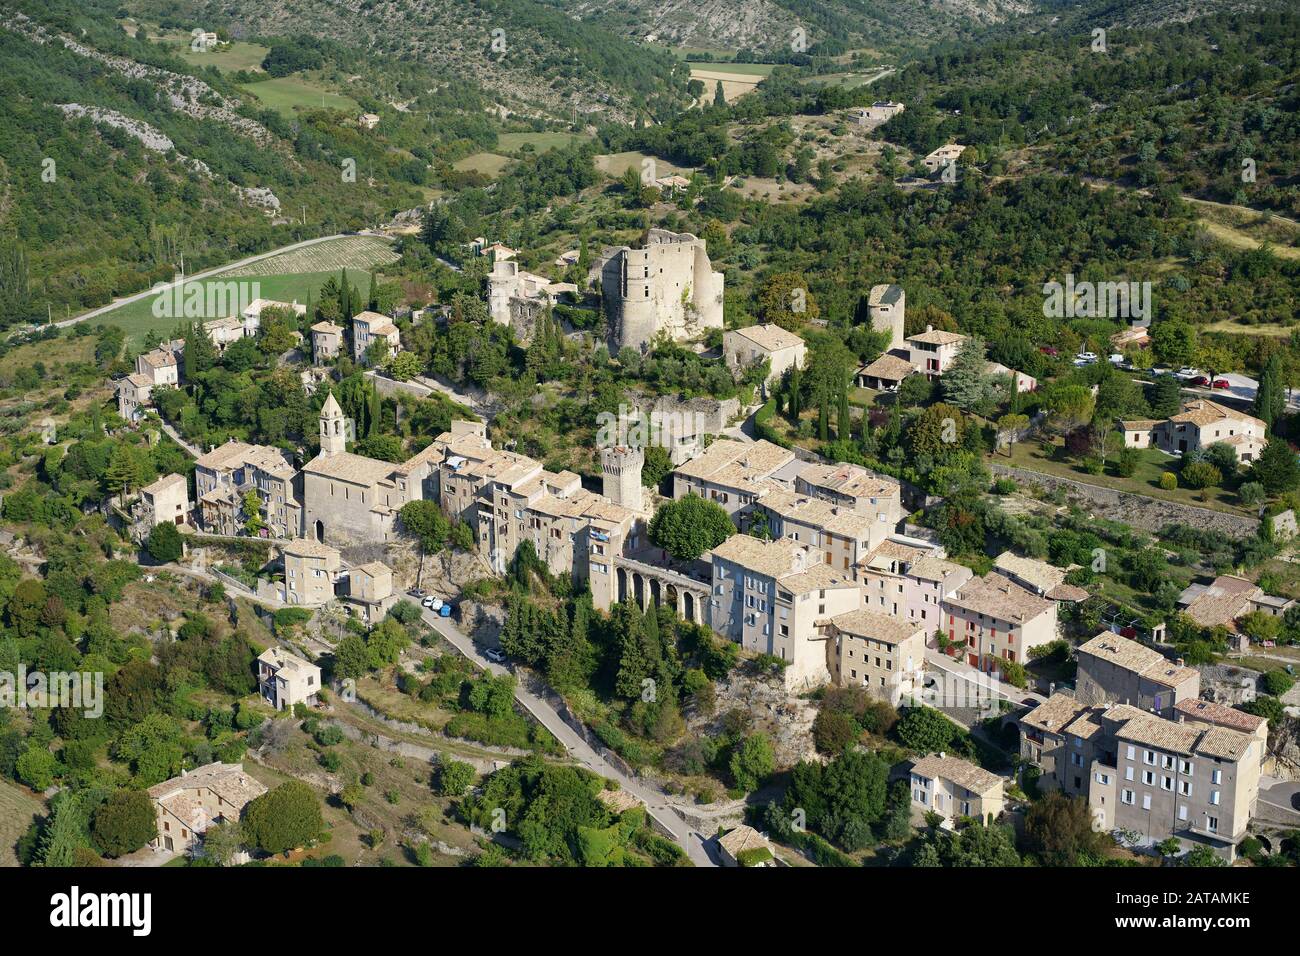 AERIAL VIEW. Provencal village built on a hill, crowned with a medieval castle in ruins. Montbrun-les-Bains, Drome, France. Stock Photo